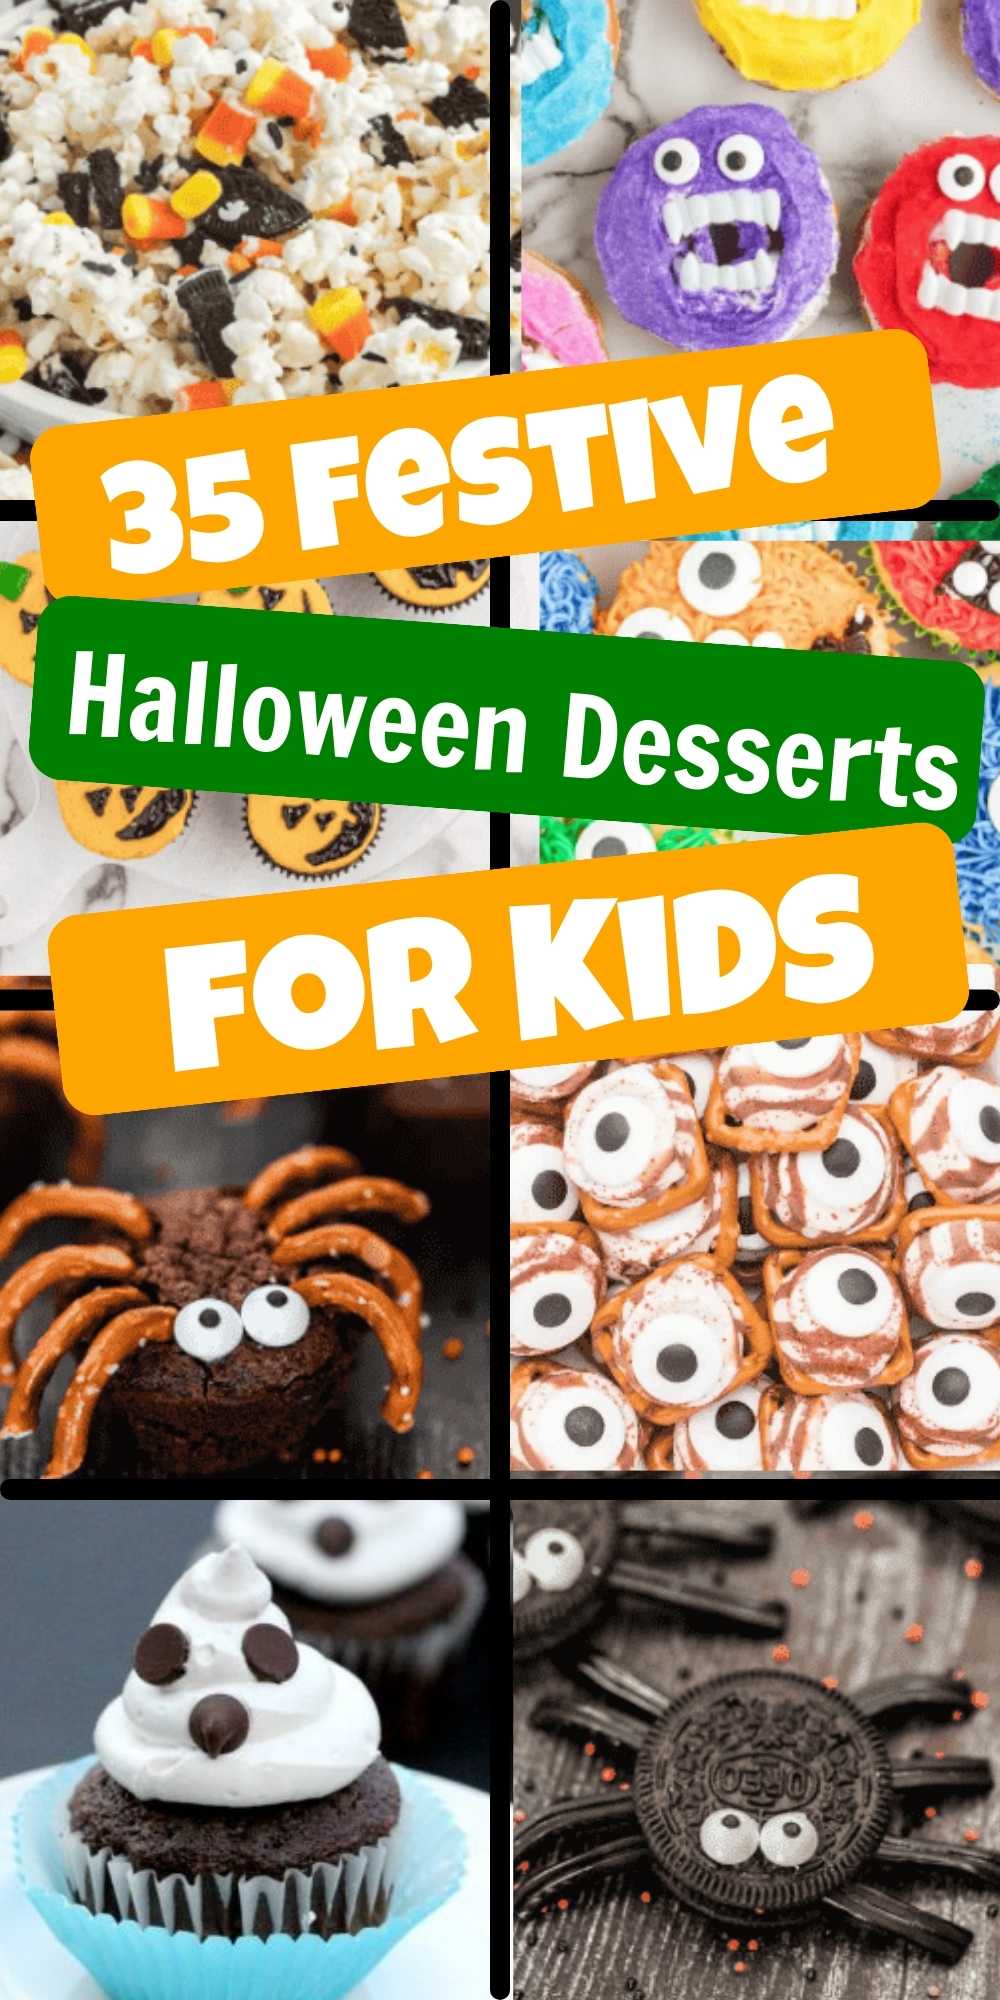 Best candy eyes for any dessert decoration! I learned it from my